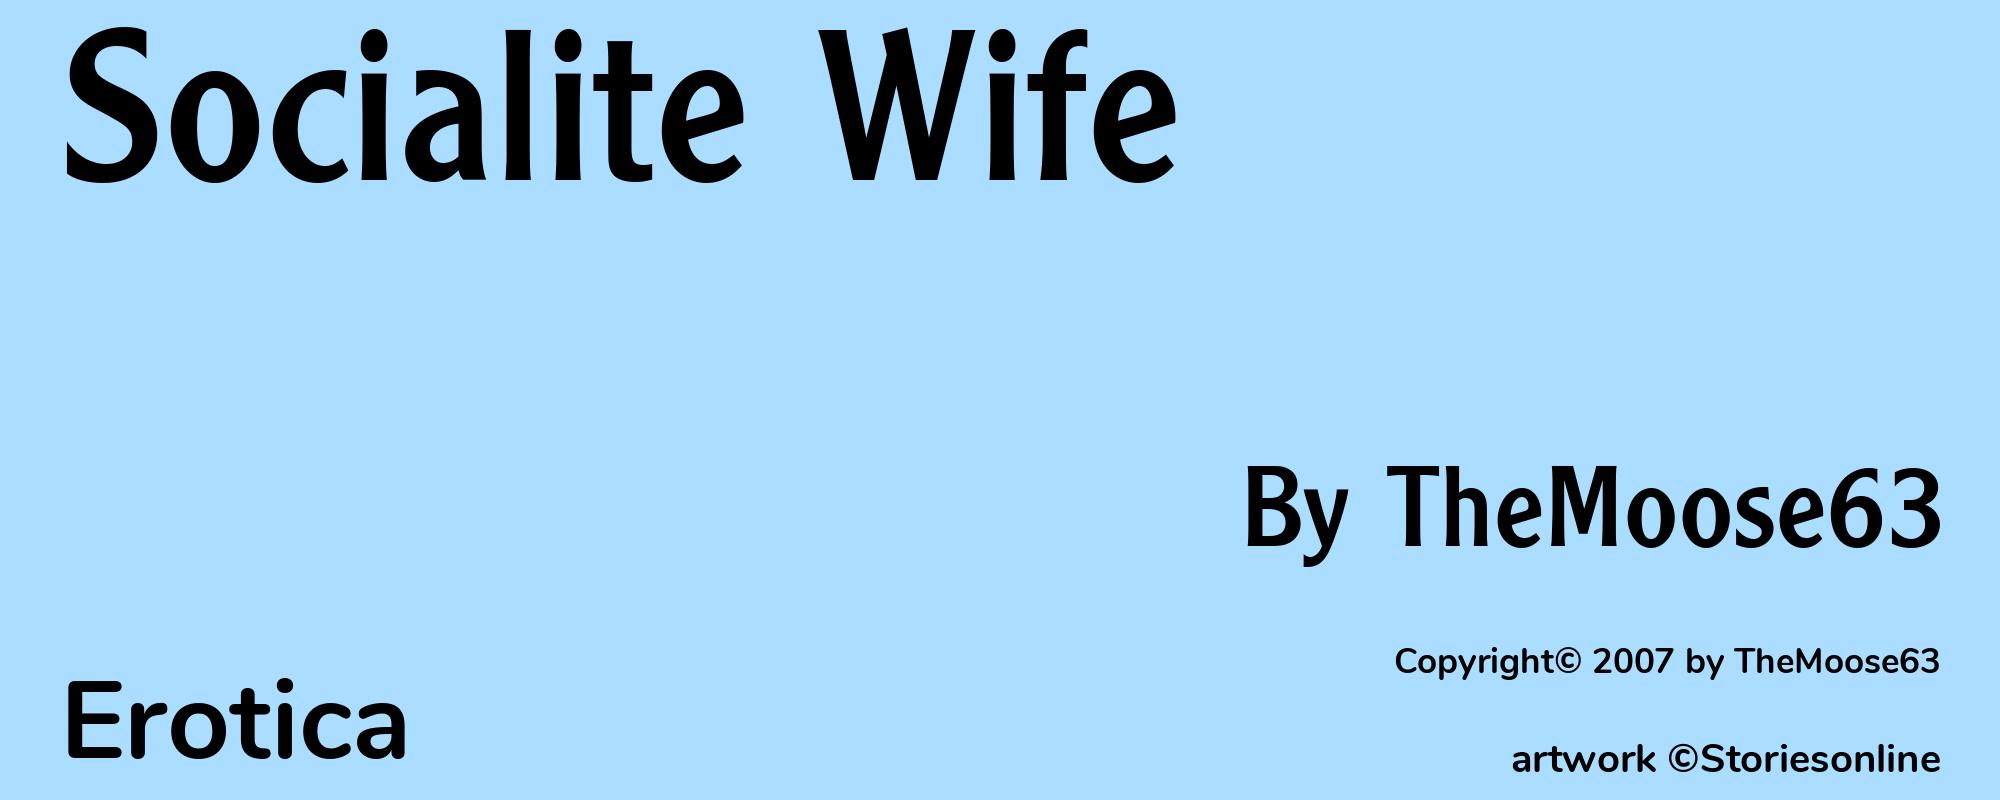 Socialite Wife - Cover